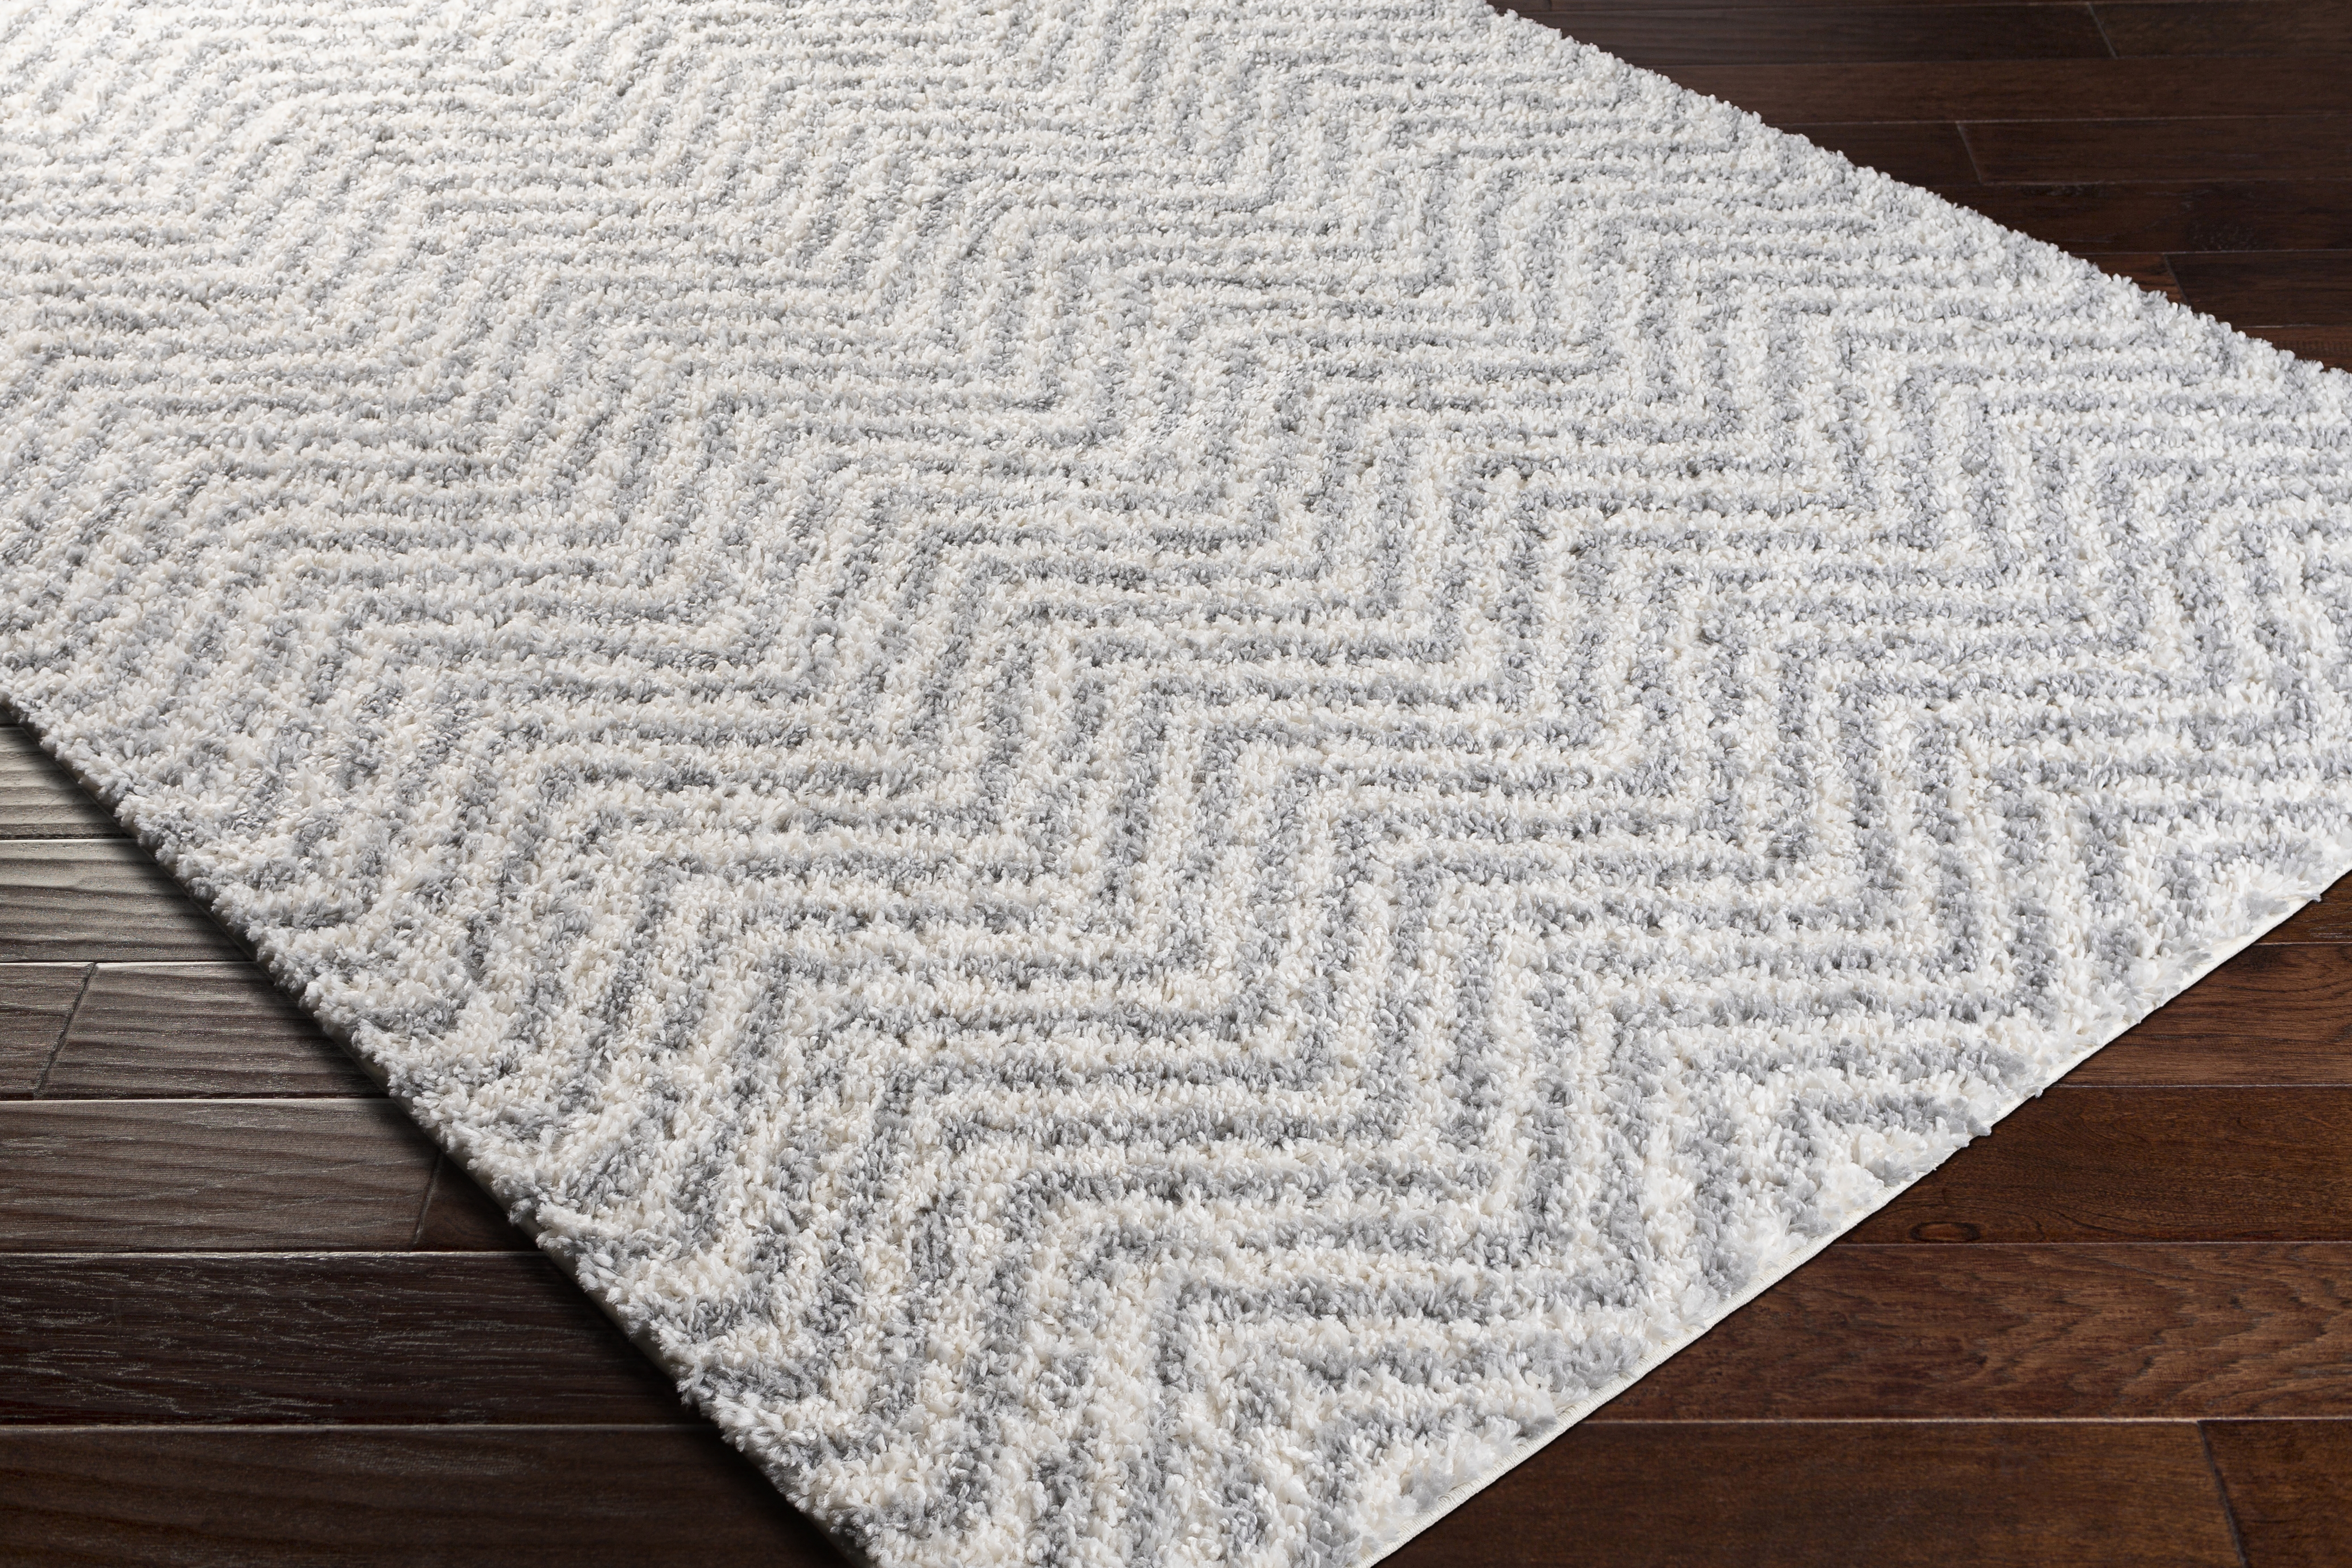 Deluxe Shag Rug, 2' x 3' - Image 6